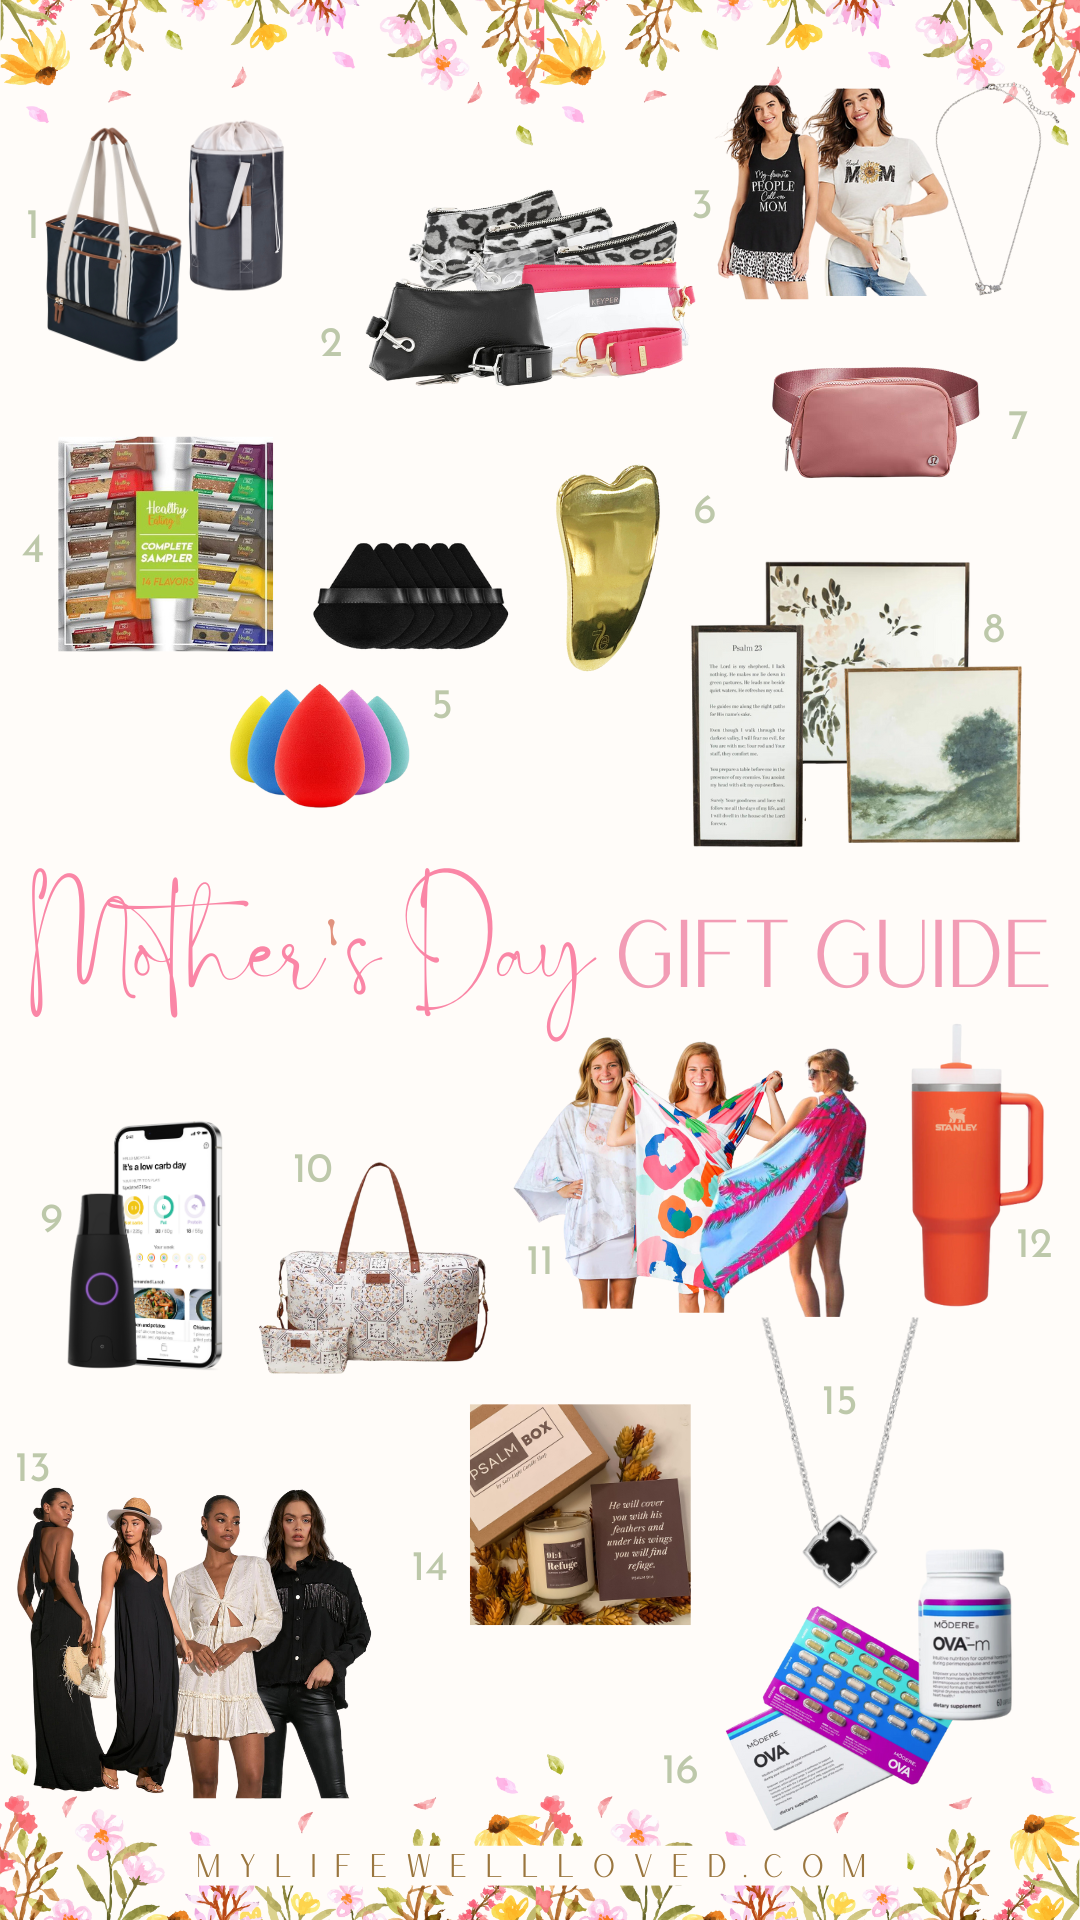 Unique Christmas Gifts For Mom - Healthy By Heather Brown